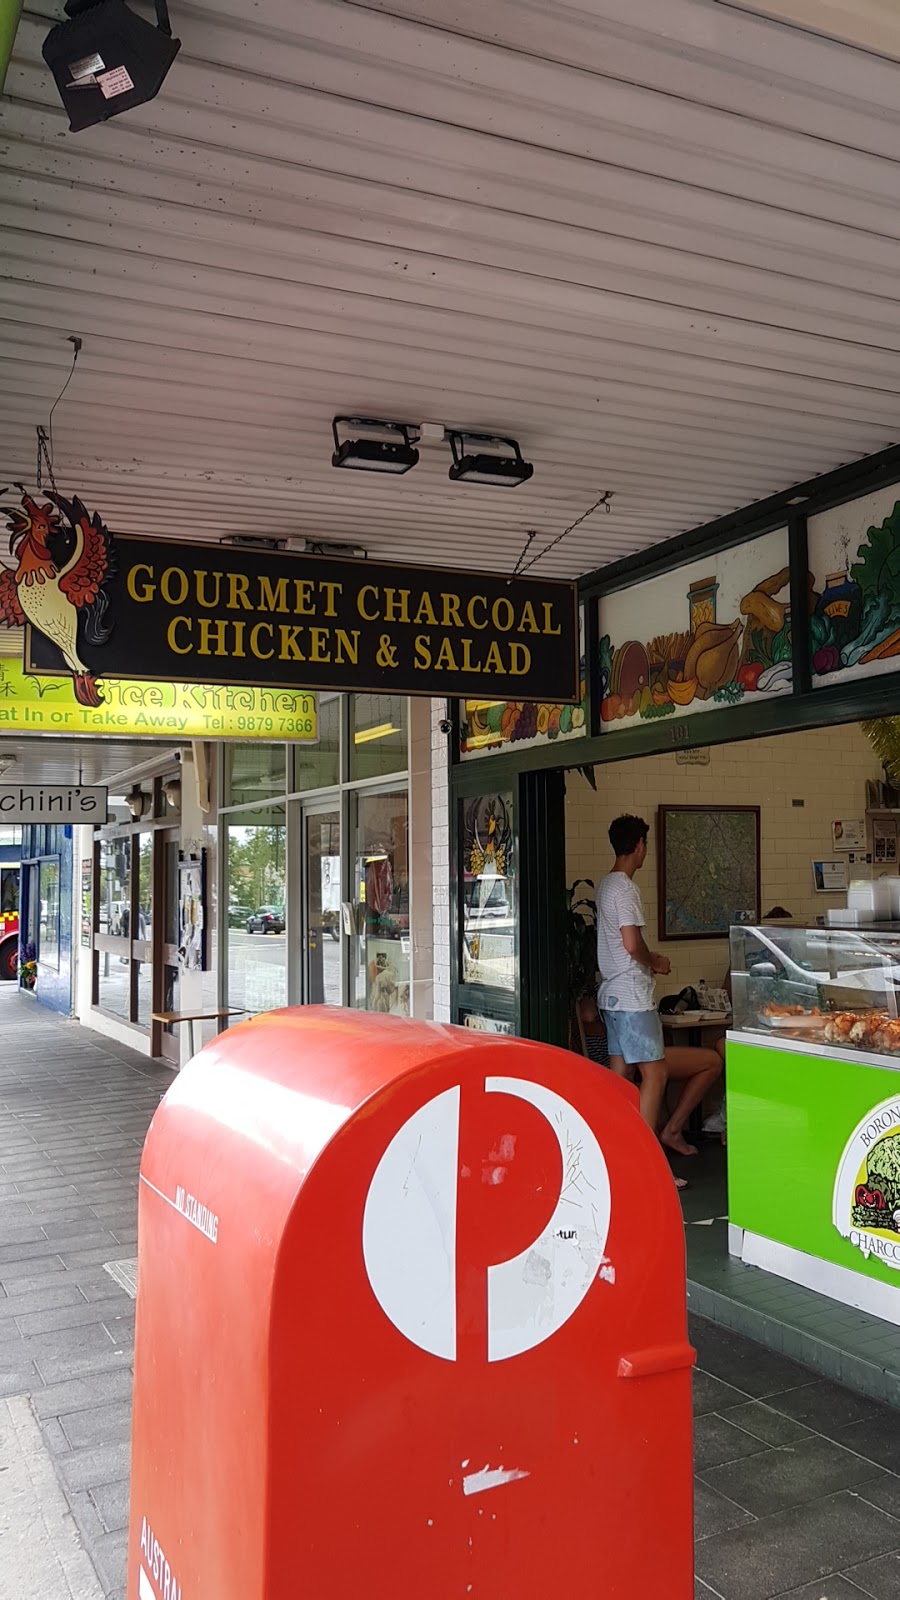 Boronia Park Gourmet Charcoal Chicken & Salad | restaurant | 101 Pittwater Rd, Hunters Hill NSW 2110, Australia | 0298173998 OR +61 2 9817 3998